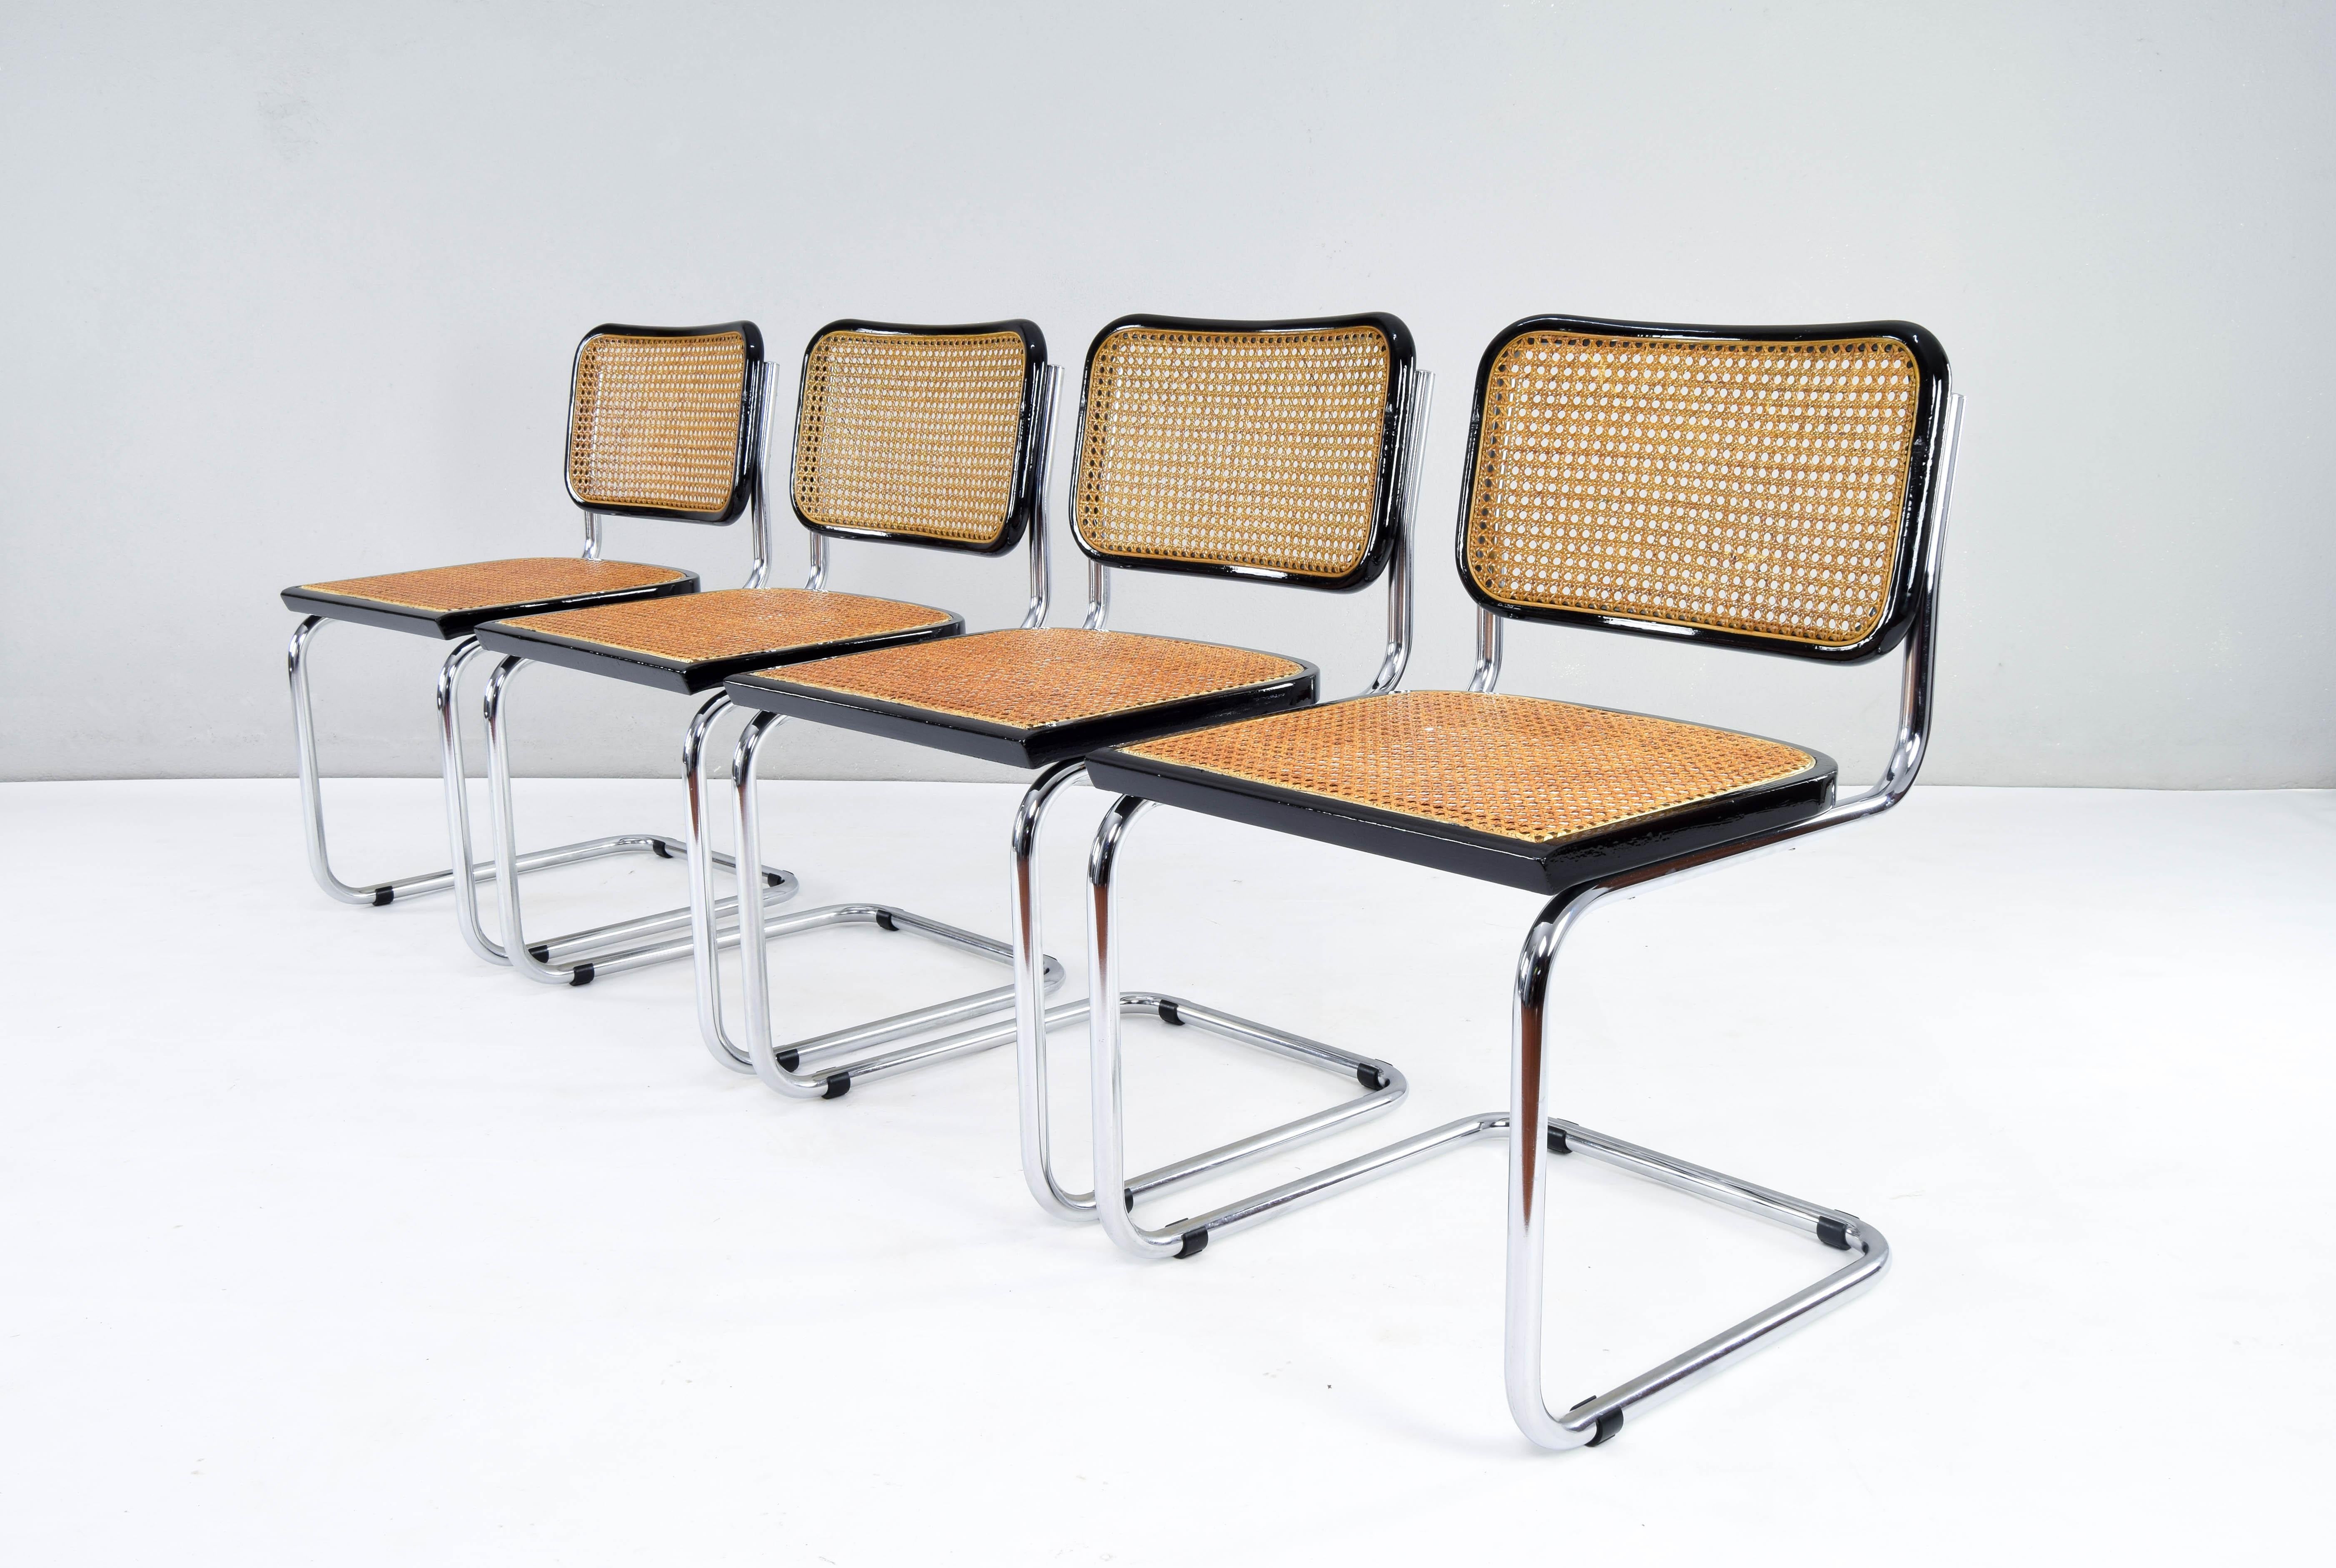 Set of four Cesca chairs, model B32, Italy in the 1970s. This set of 4 chairs are part of a high quality edition.

Chrome tubular structure in very good condition. Beech wood frames lacquered in black and Viennese natural grid. The natural fiber